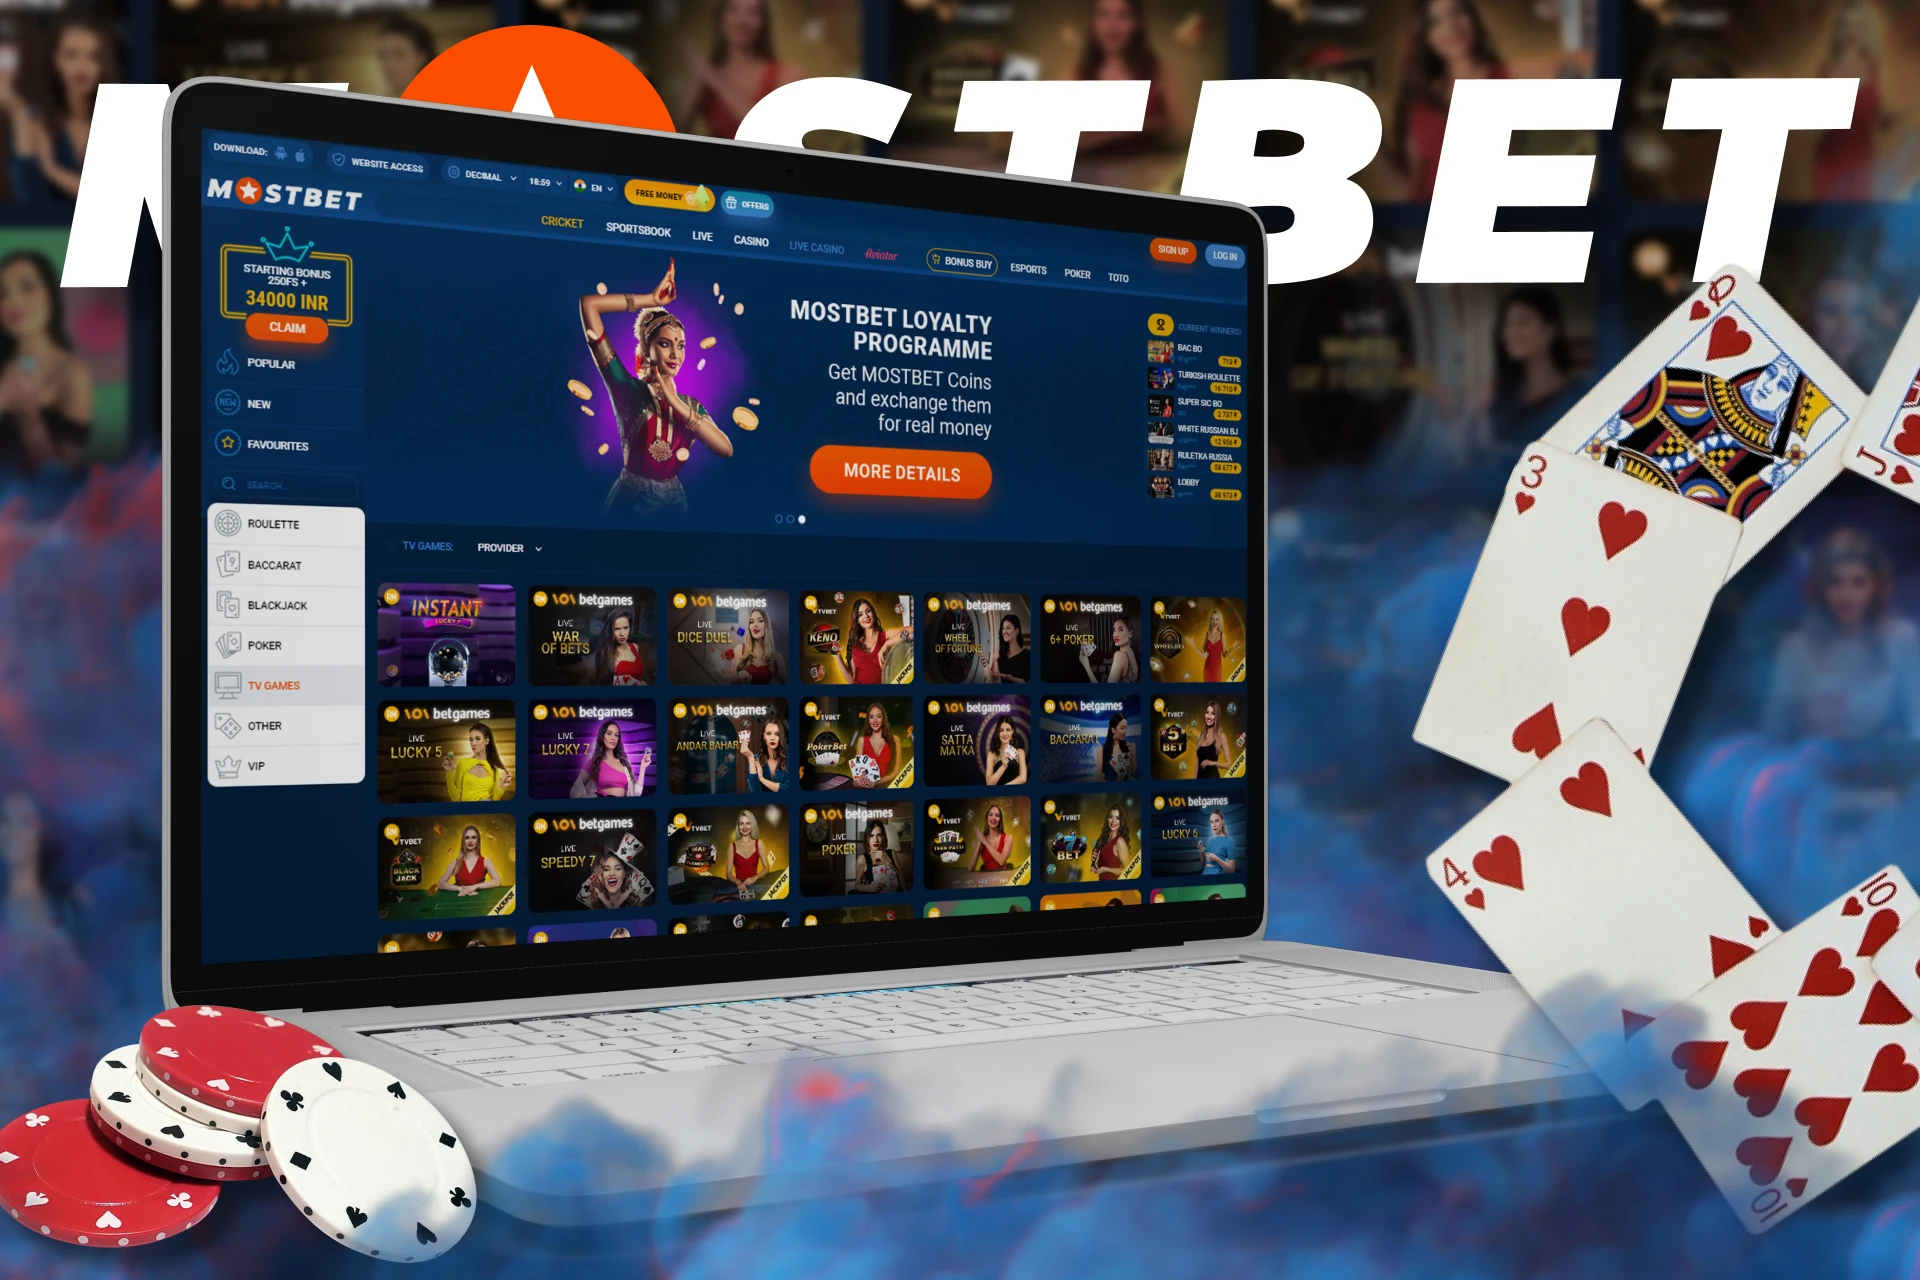 You can have a great time playing Andar Bahar at Mostbet.